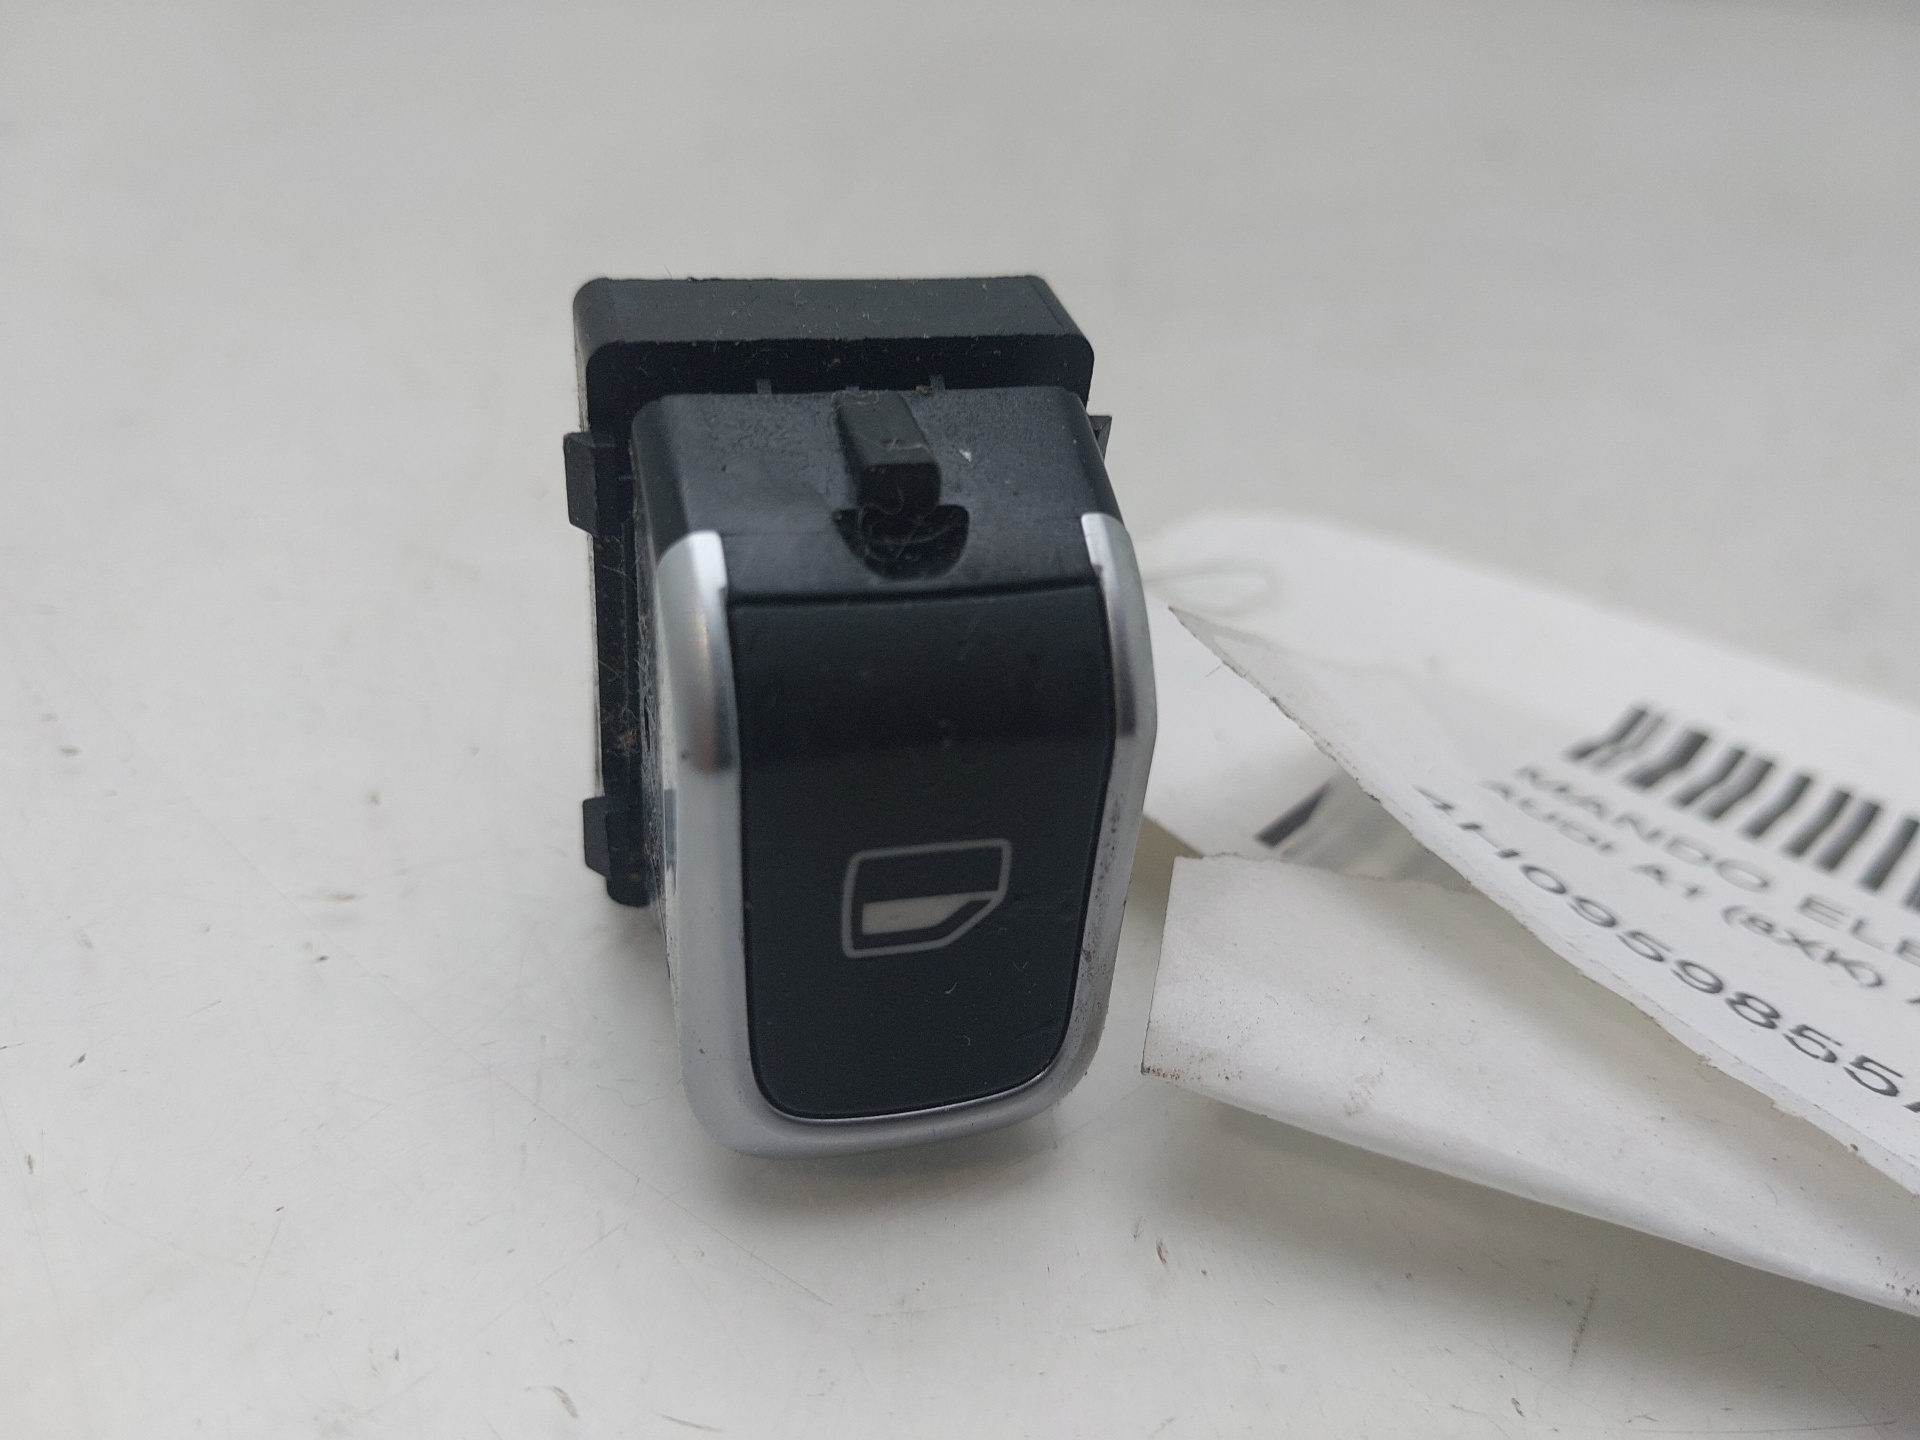 AUDI A1 8X (2010-2020) Rear Right Door Window Control Switch 4H0959855A, 101.200KMS, 5PUERTAS 22738919